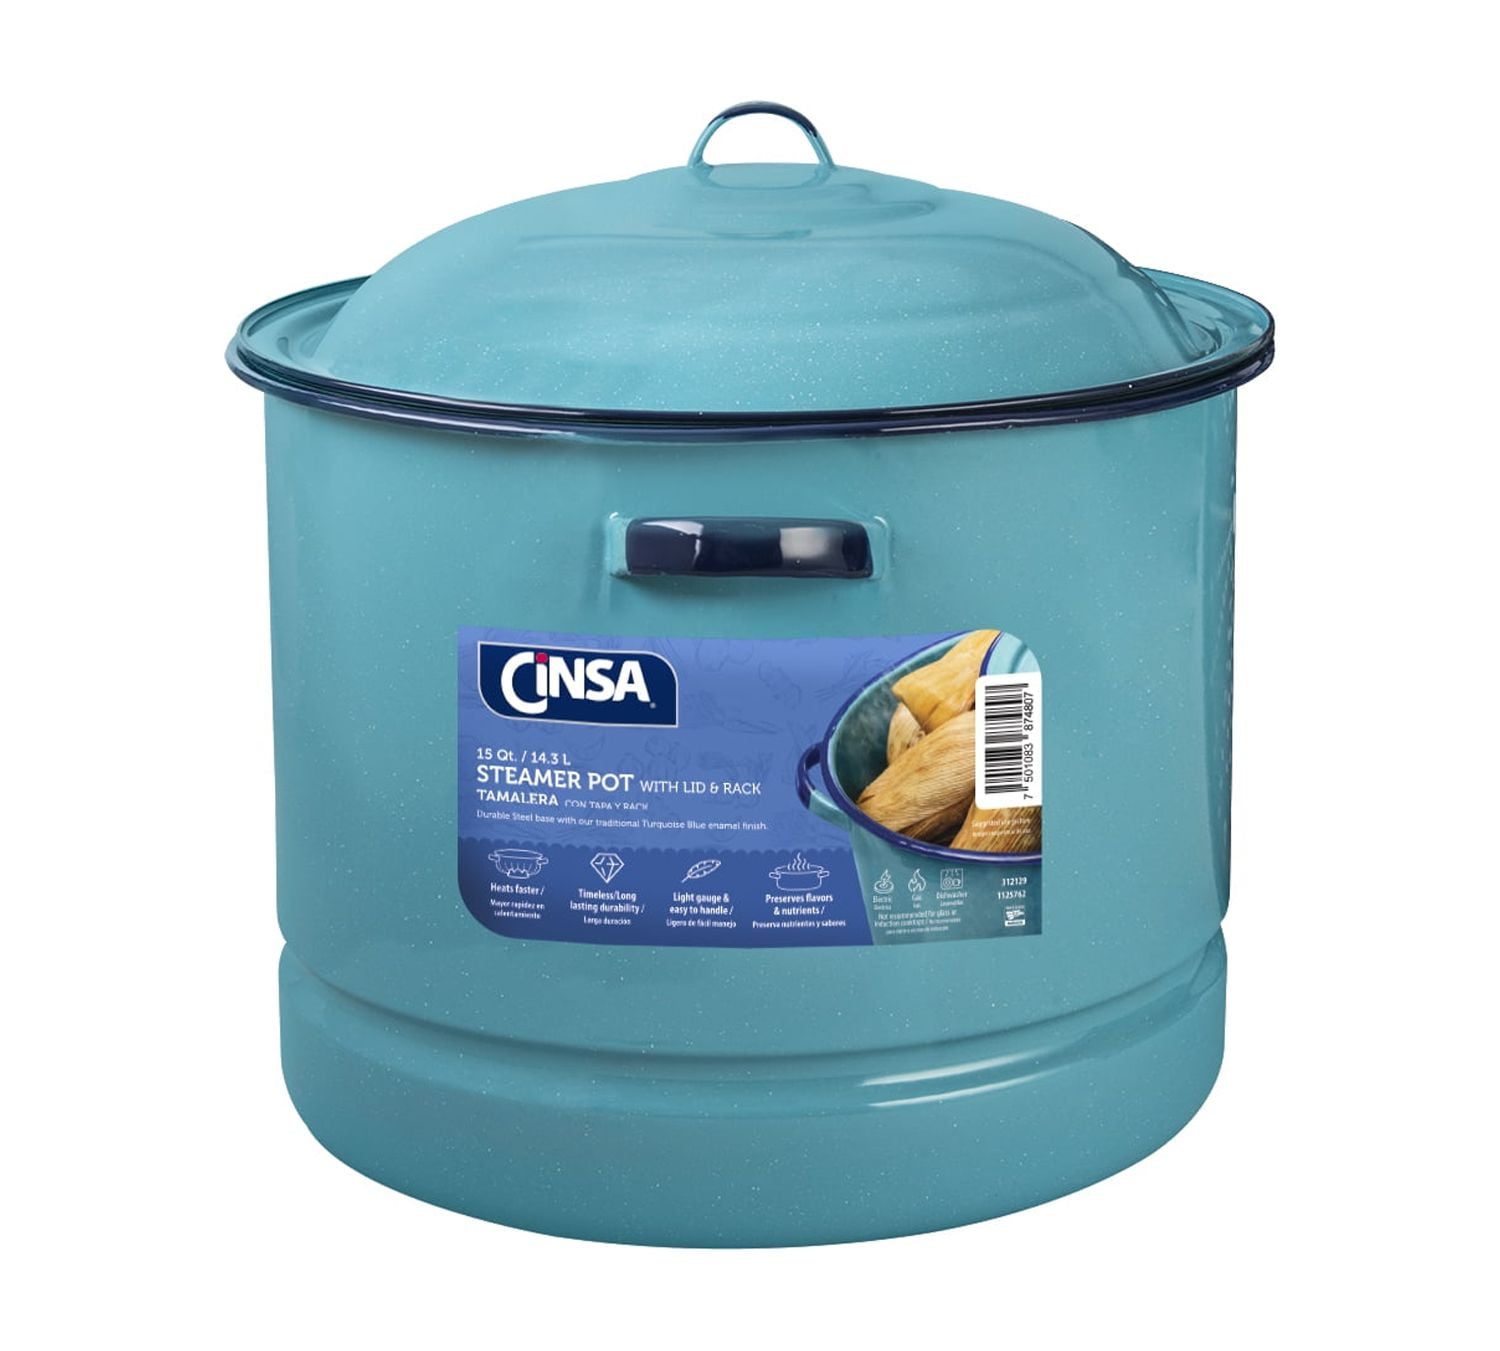 Cinsa Enamelware Coffee Pot (Turquoise Color) - 8 Cups - Camping